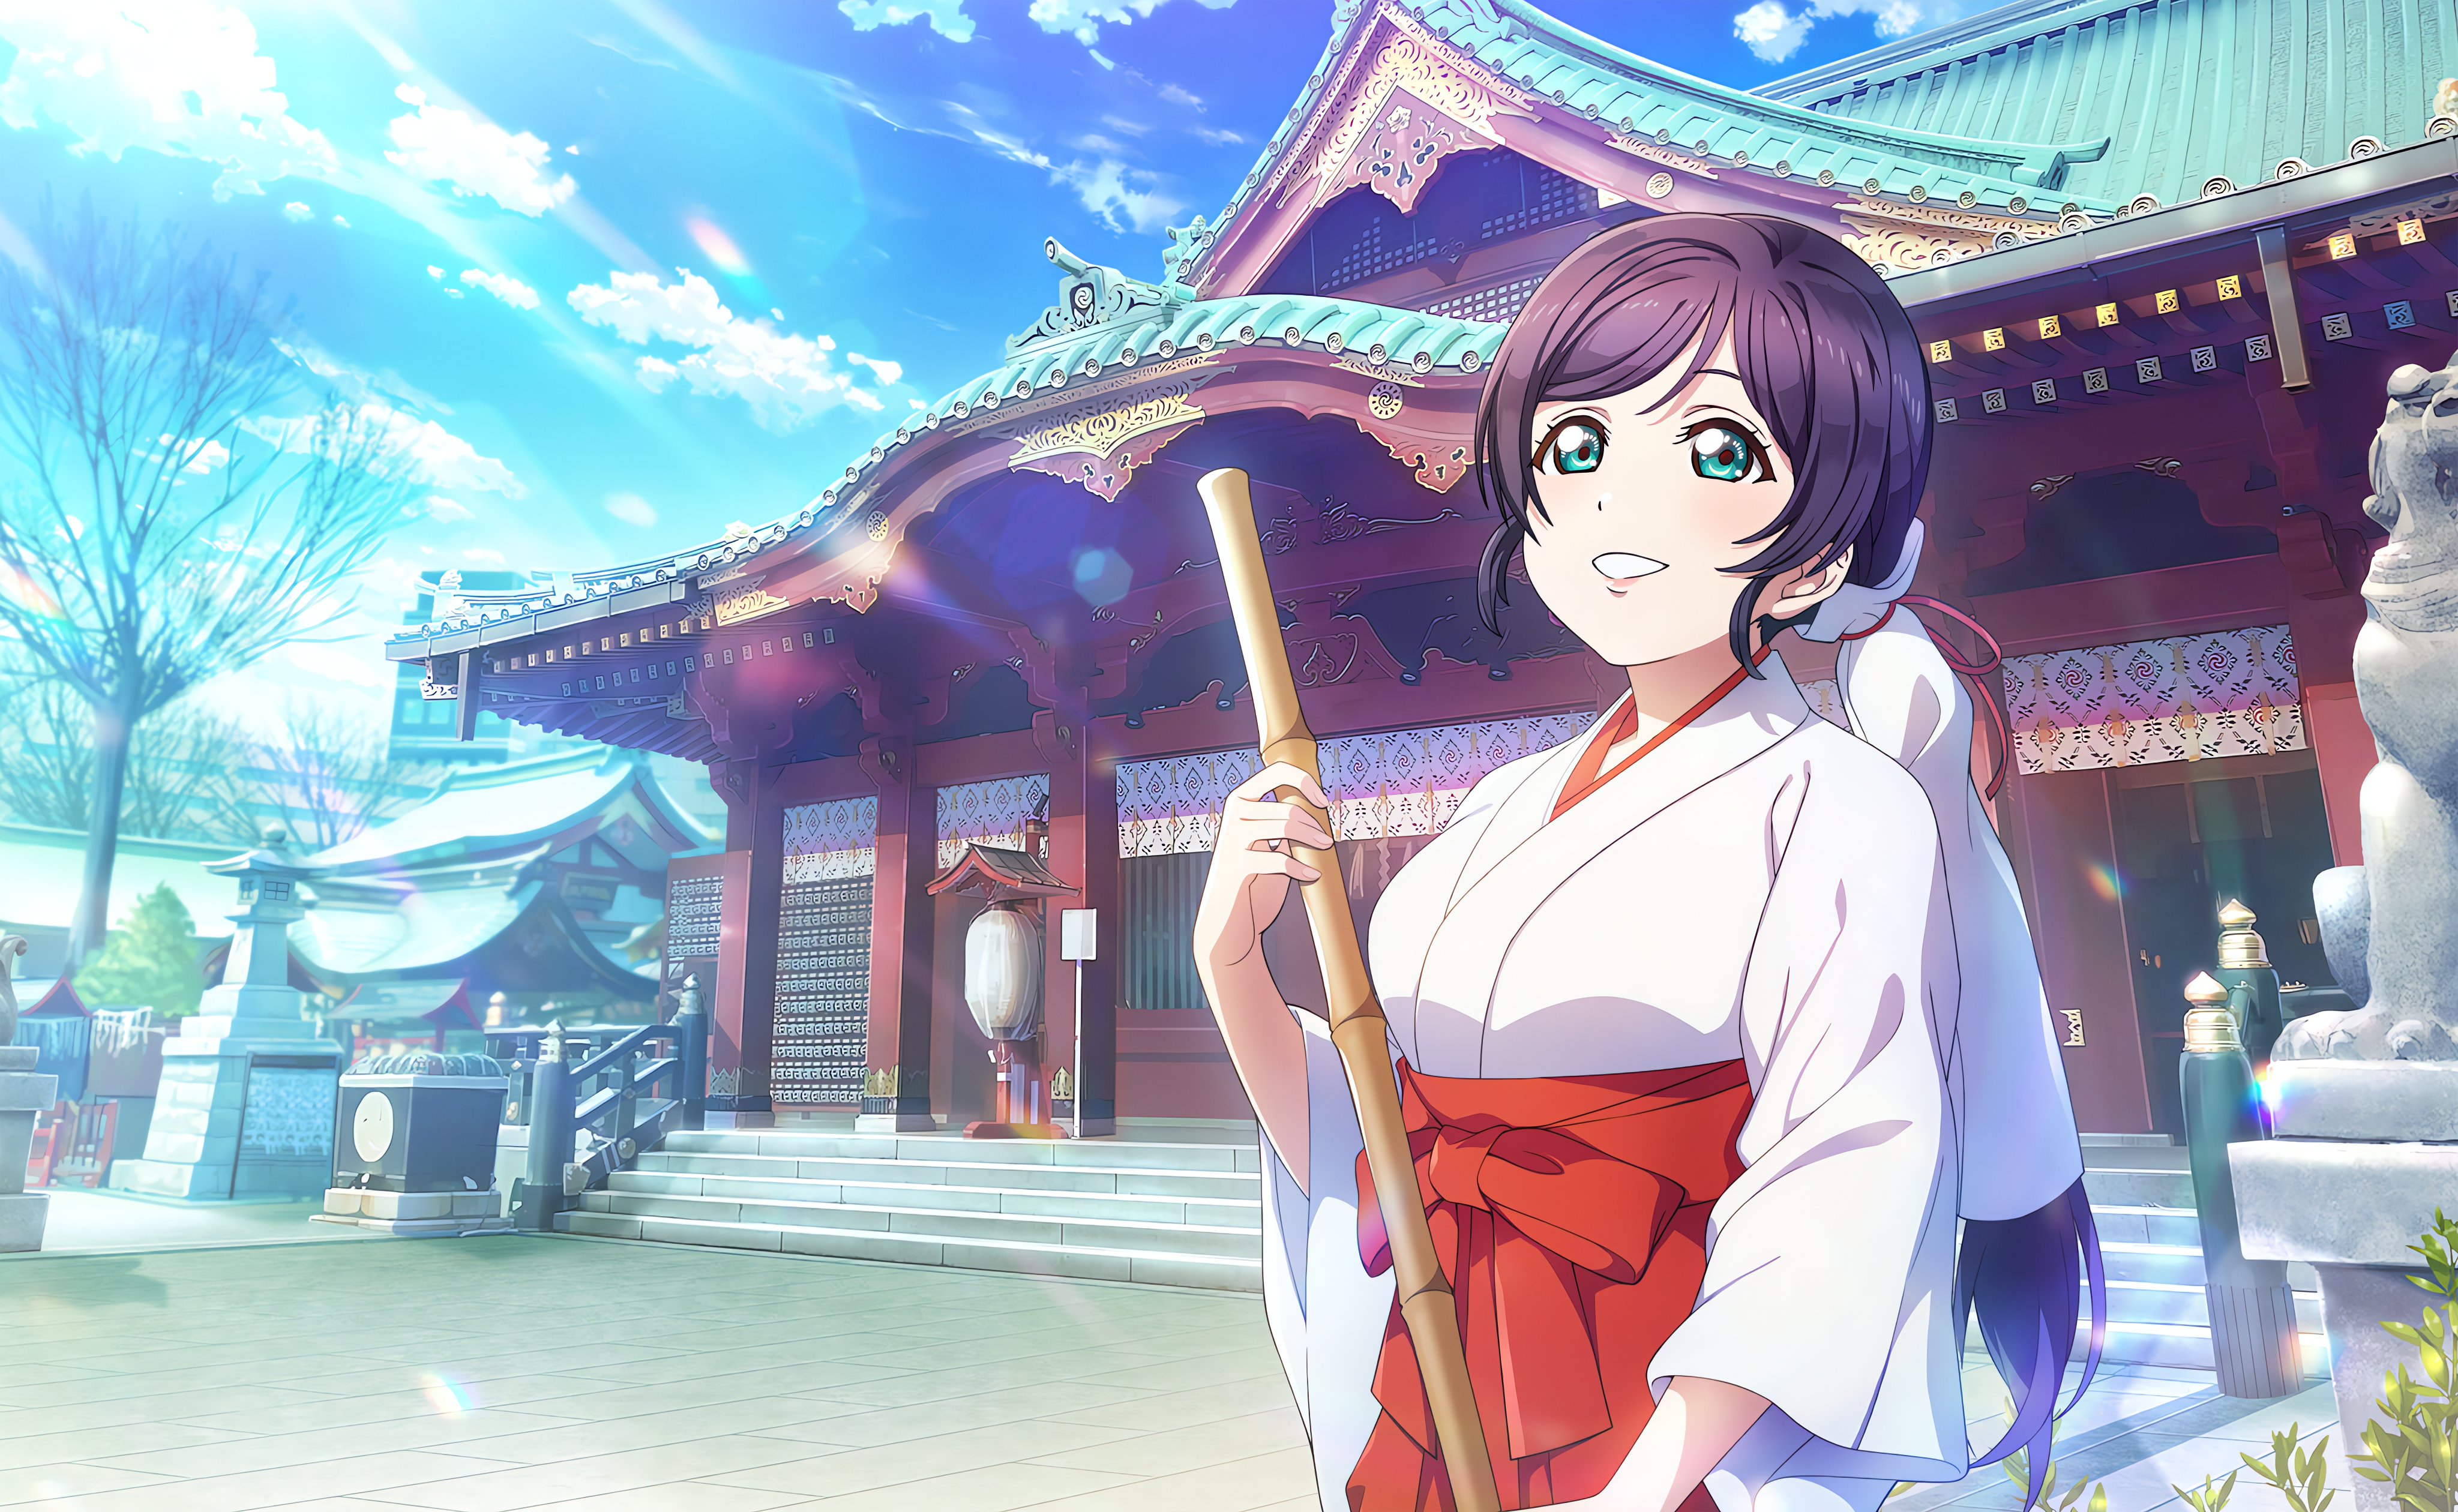 Anime 4096x2520 Toujou Nozomi Love Live! anime anime girls sunlight sky clouds looking away long hair kimono temple stairs trees statue smiling leaves building